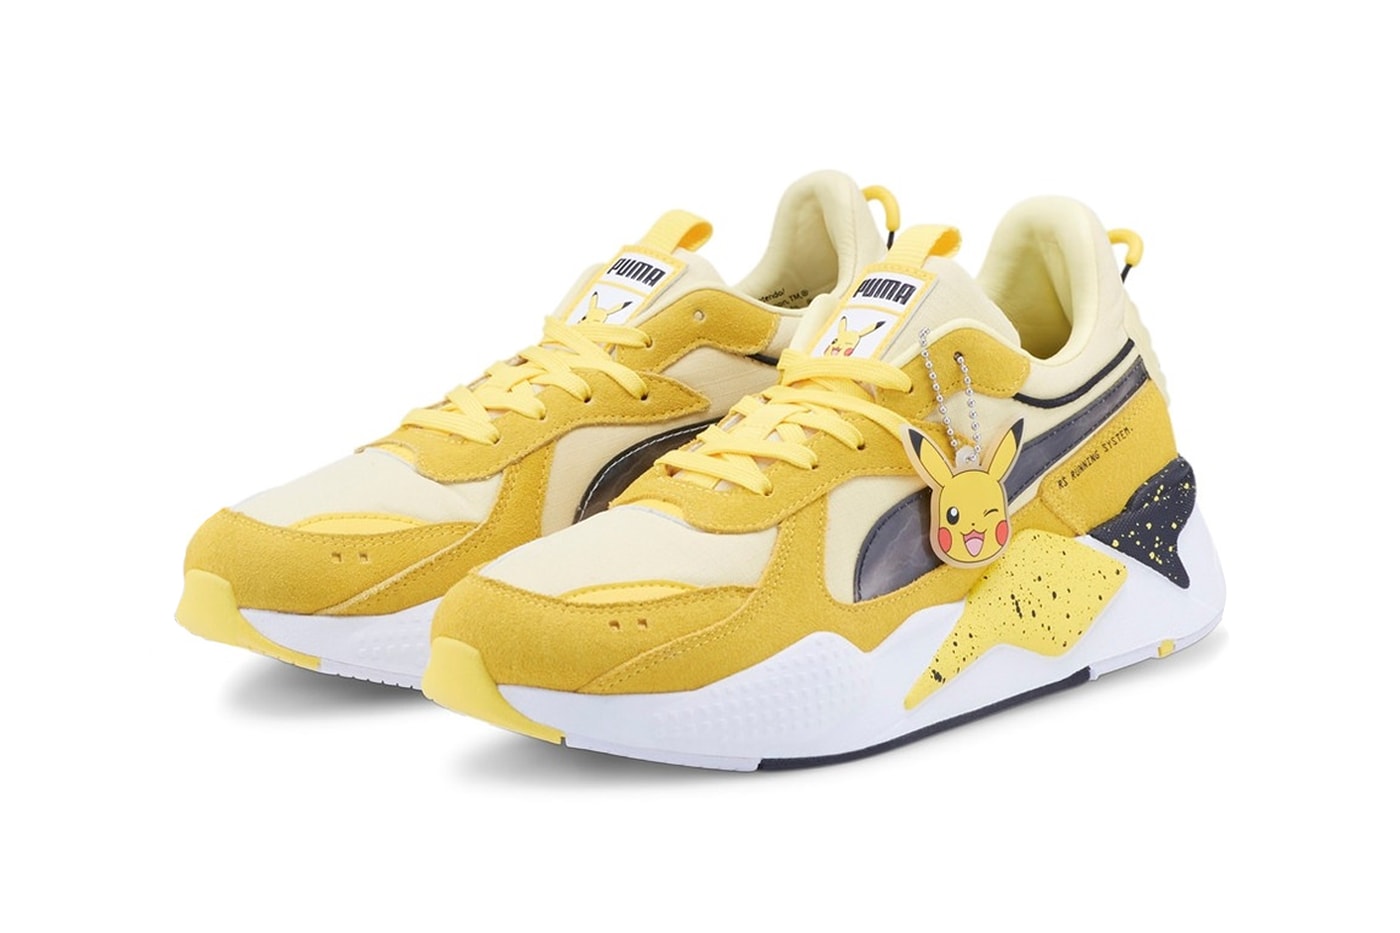 pokemon puma 25 years footwear sneaker collection bulbasaur rider fv charmander slipstream lo squirtle puma suede pikachu rider fv rs x pokedex release info date price